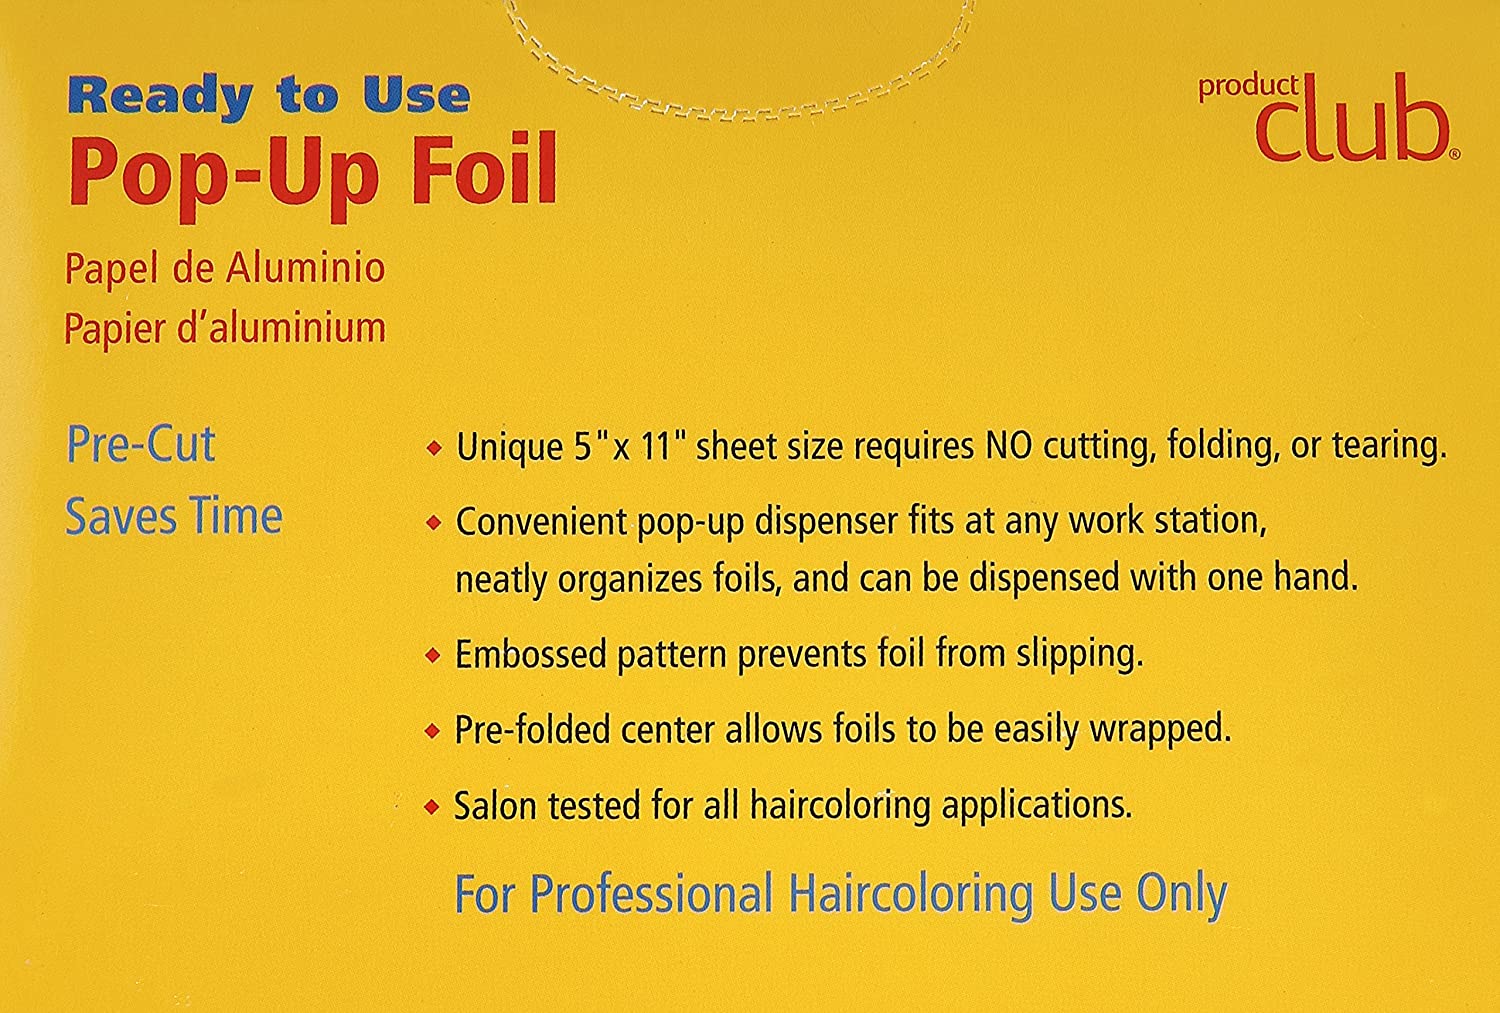 https://www.salonwholesaler.com/cdn/shop/products/foil-sheets-silver-5-x-11-500-count-product-club-hair-coloring-accessories-product-club-758237.jpg?v=1608159624&width=1946